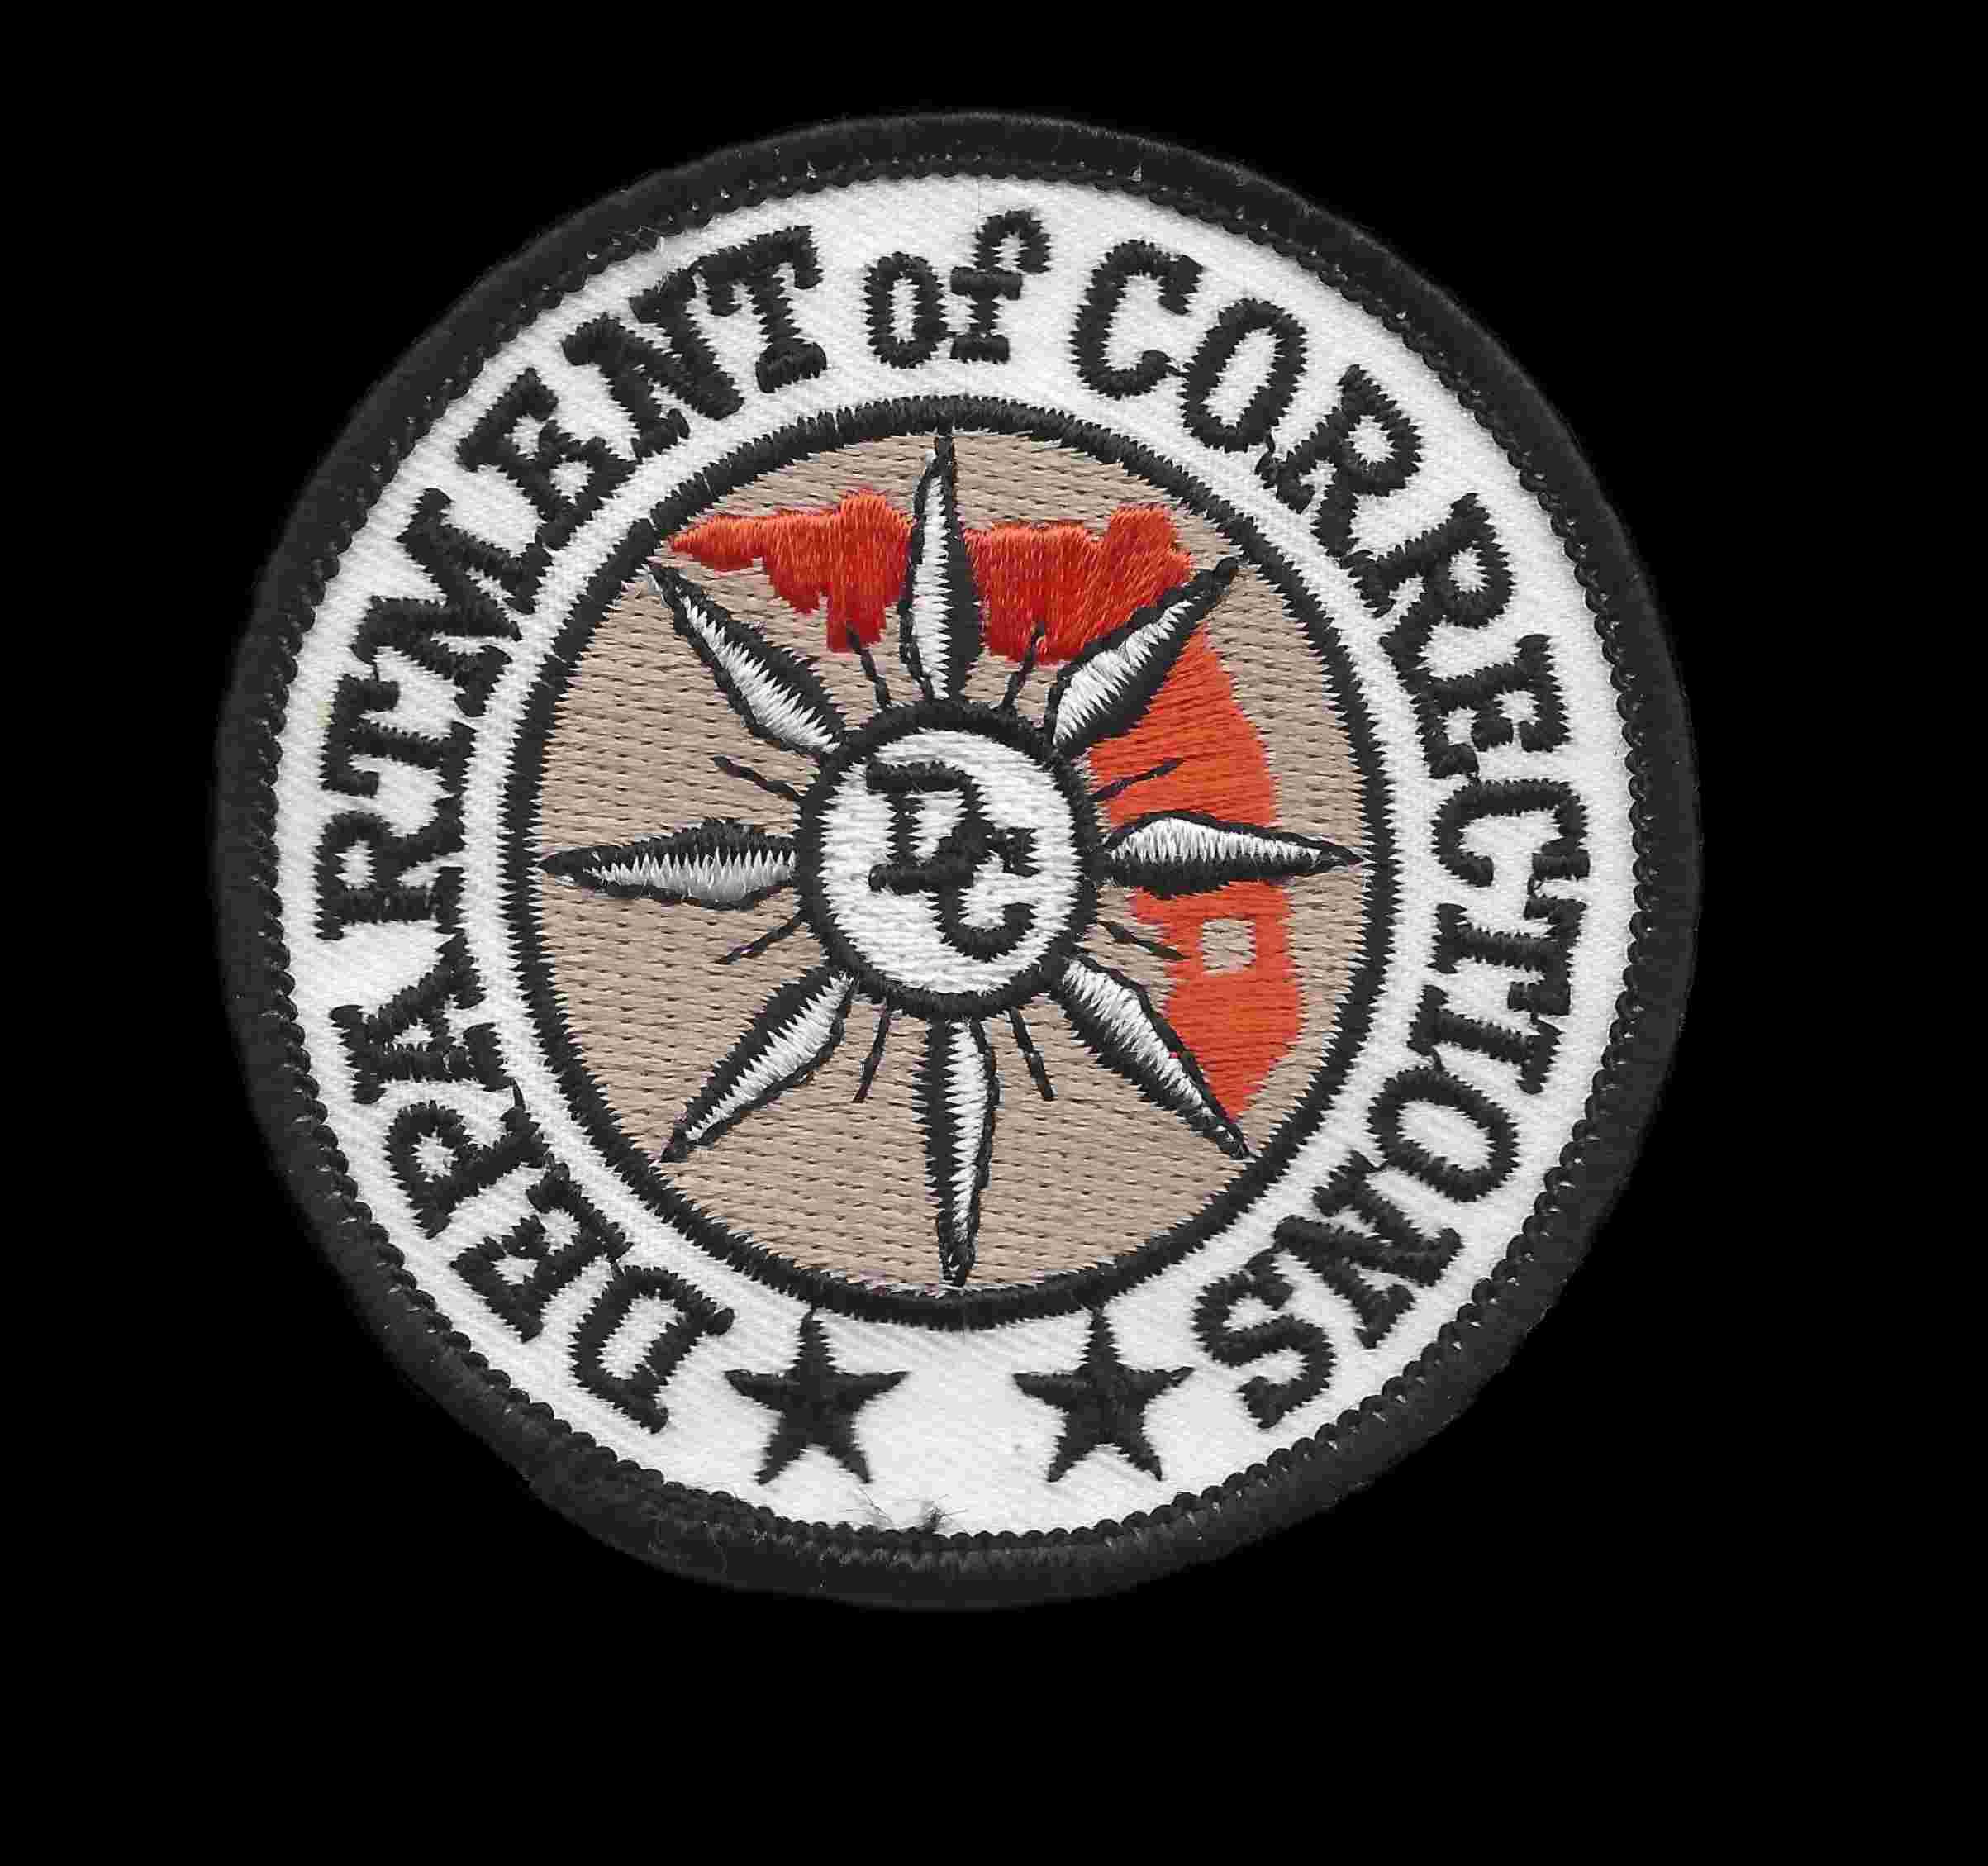 Florida Department of Corrections Patch